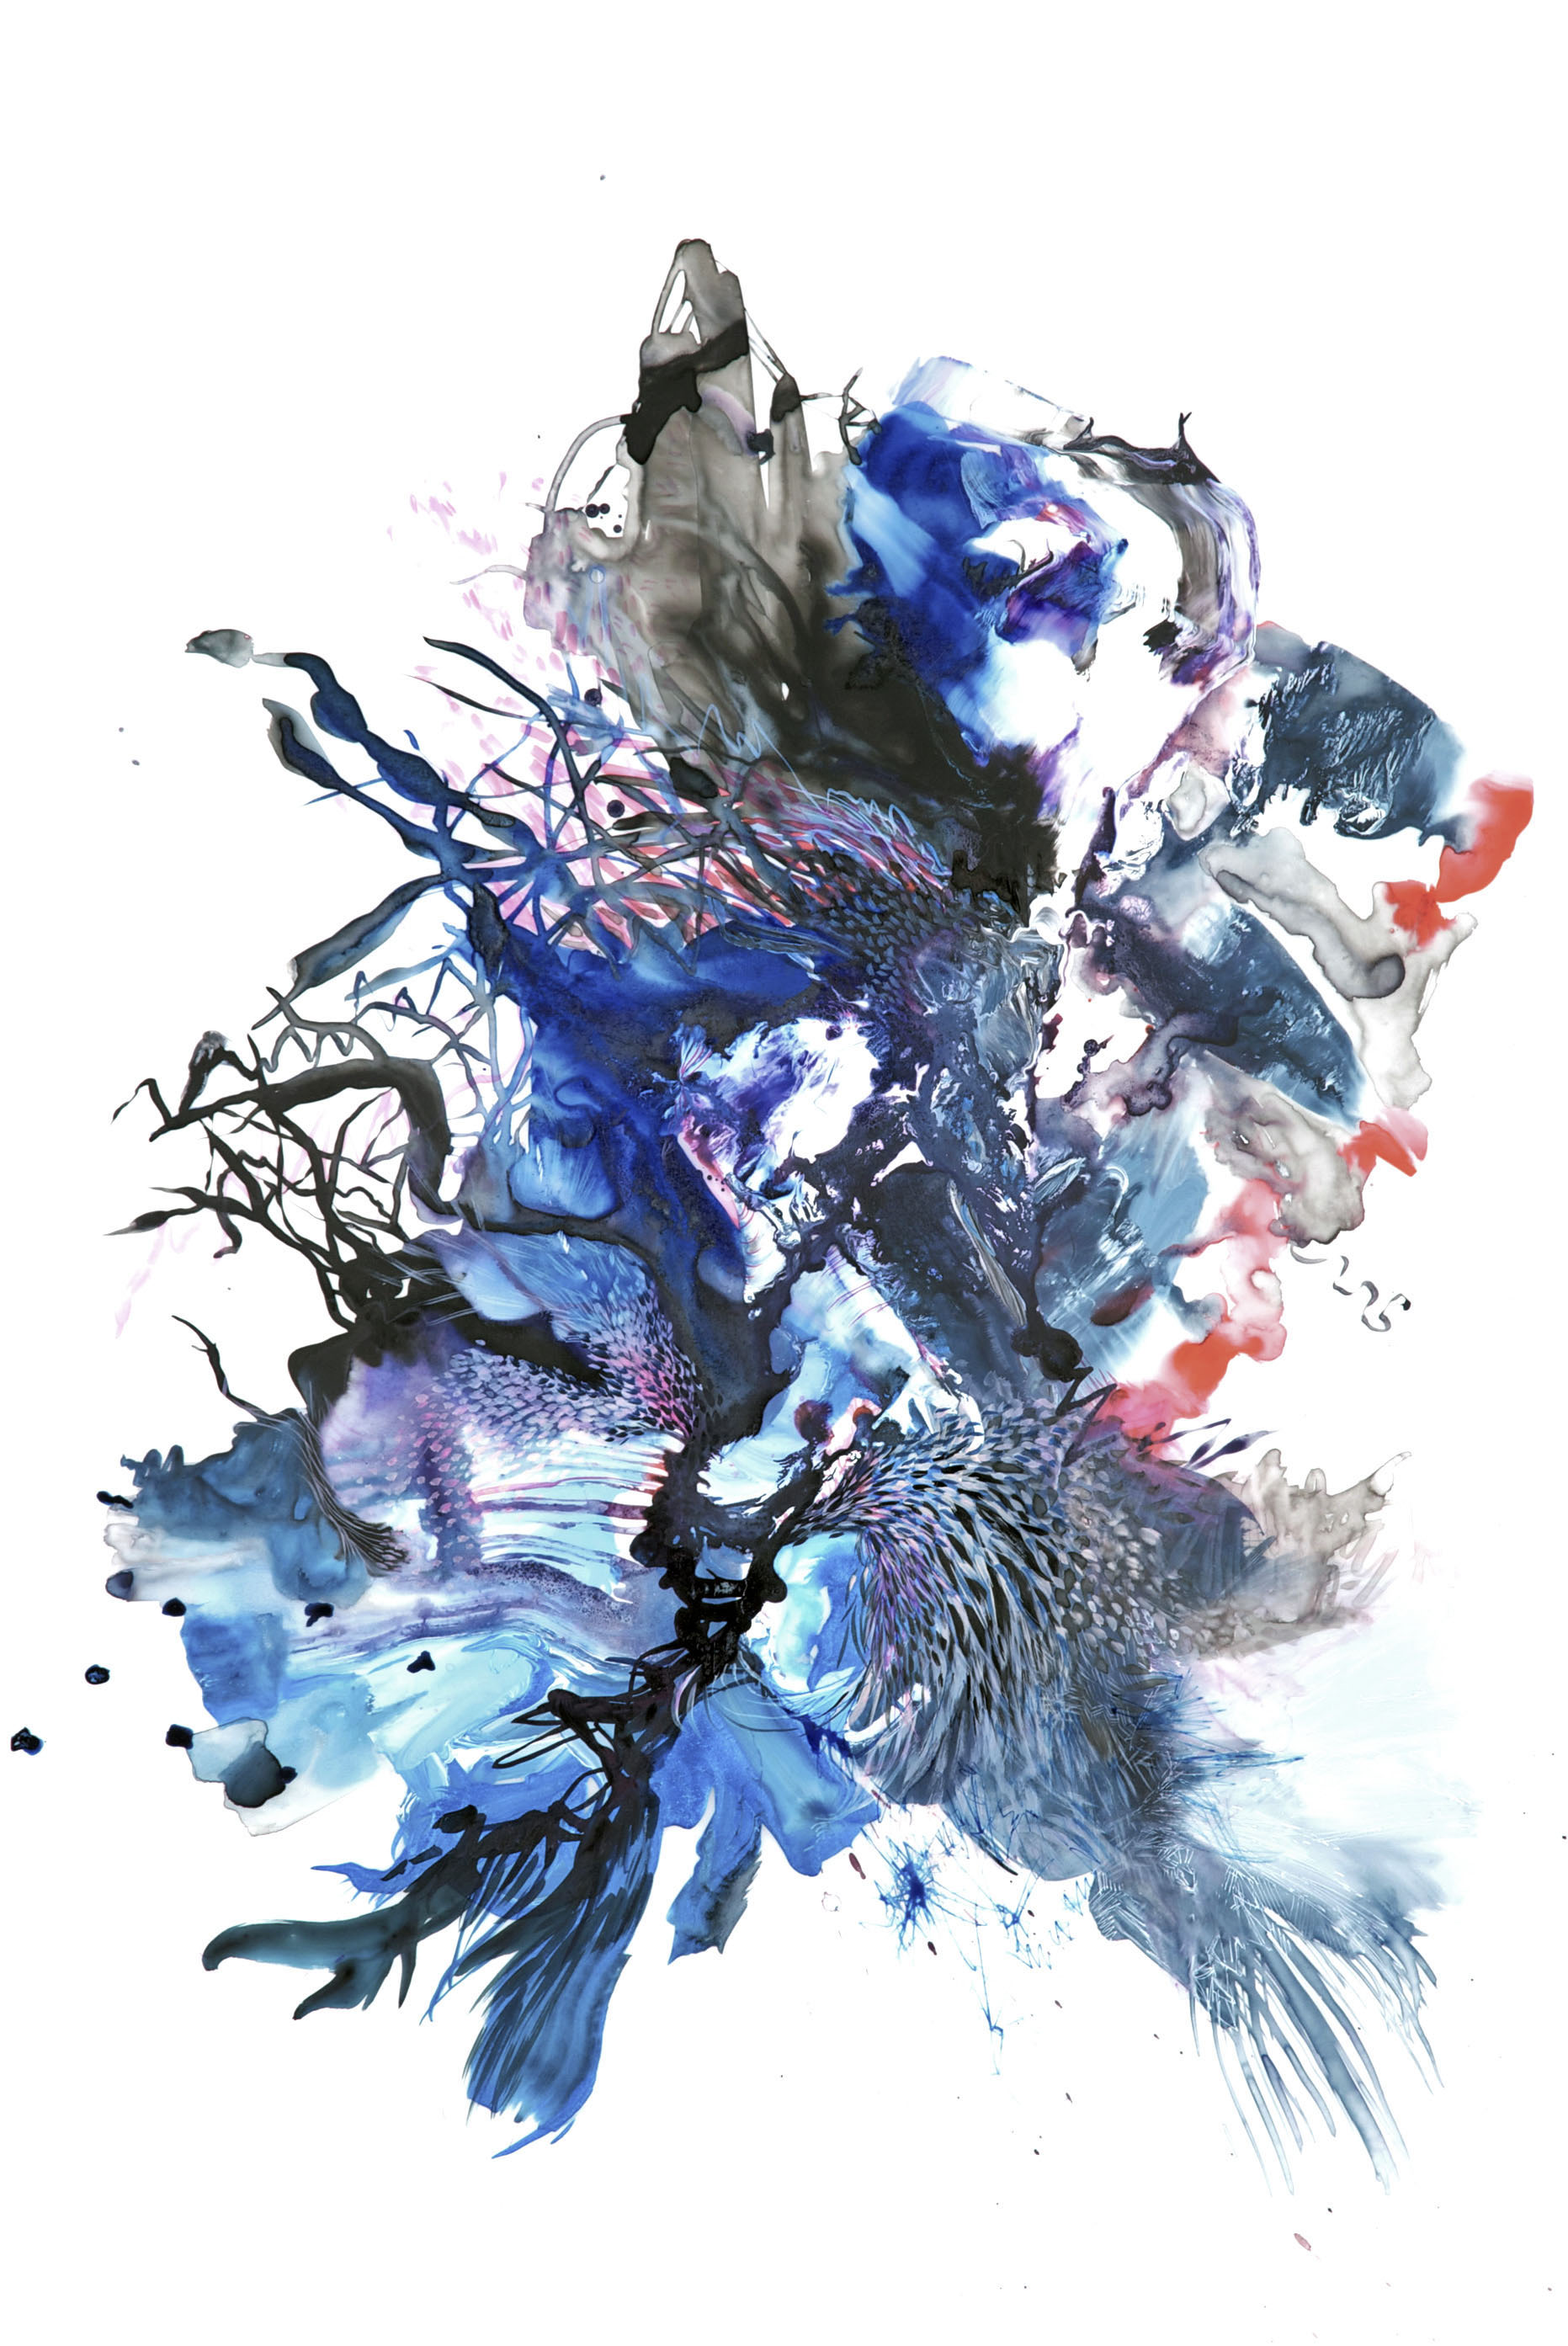  Paola Oxoa  Second Nature 7 , 2009, Ink, gouache, and graphite on mylar,  36 x 24 in. (91.44 x 60.96 cm) 